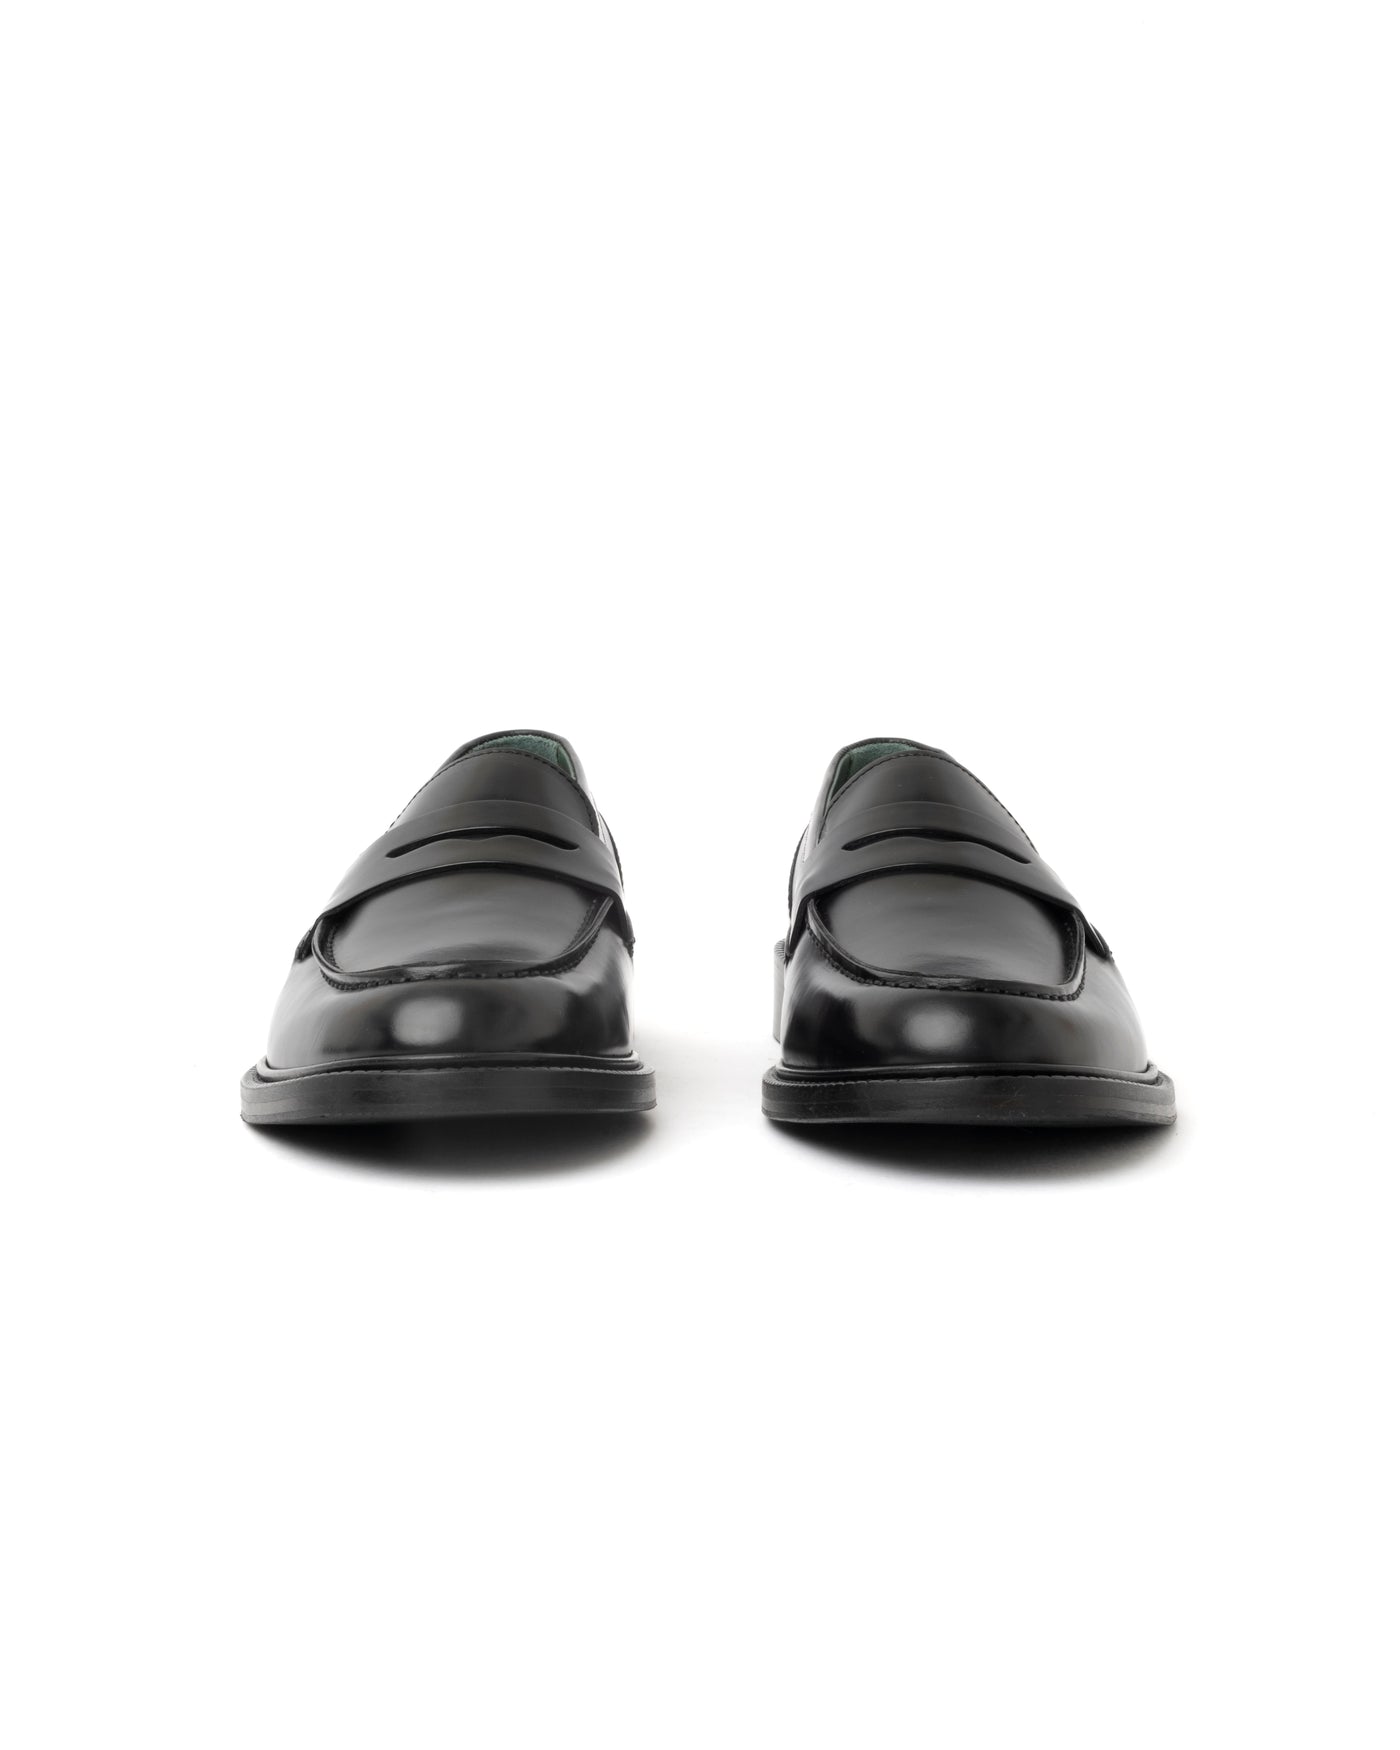 Vinny's Townee Penny Loafer Polido Leather Black